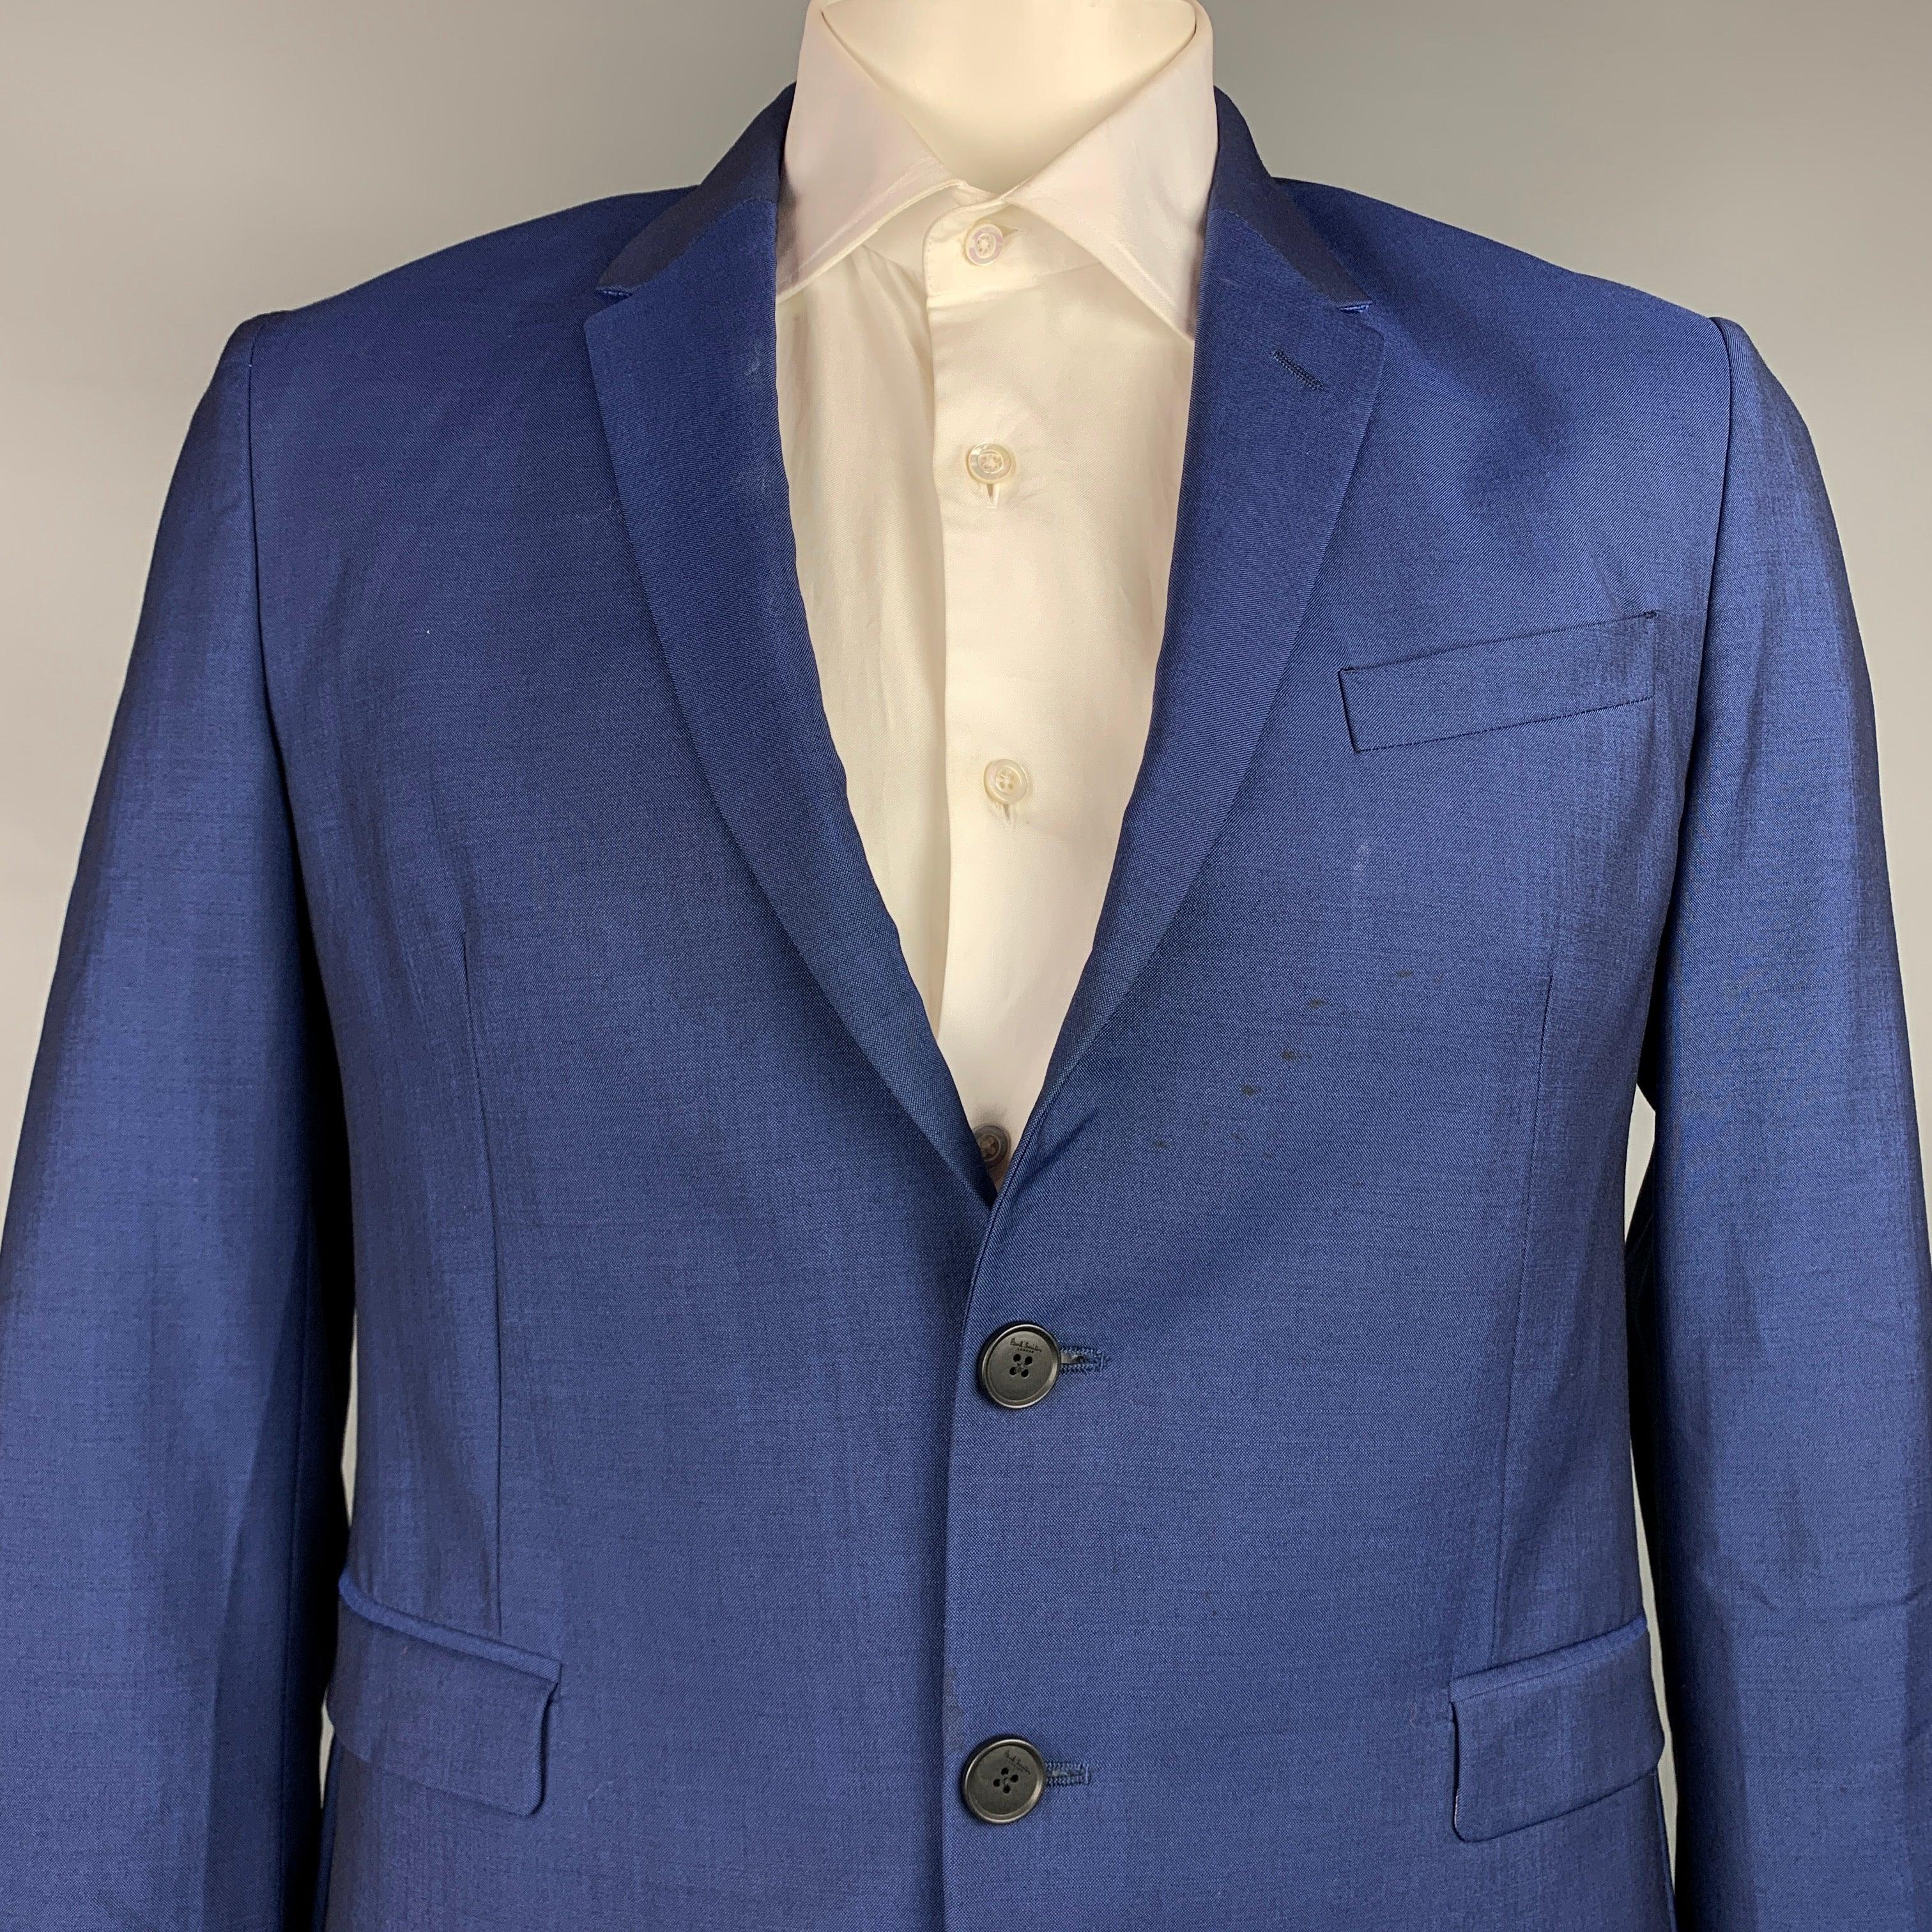 PAUL SMITH
sport coat comes in a blue wool / mohair with a full liner featuring a notch lapel, flap pockets, and a single button closure. Made in ItalyVery Good Pre-Owned Condition. 

Marked:   42 

Measurements: 
 
Shoulder: 17.5 inches  Chest: 41